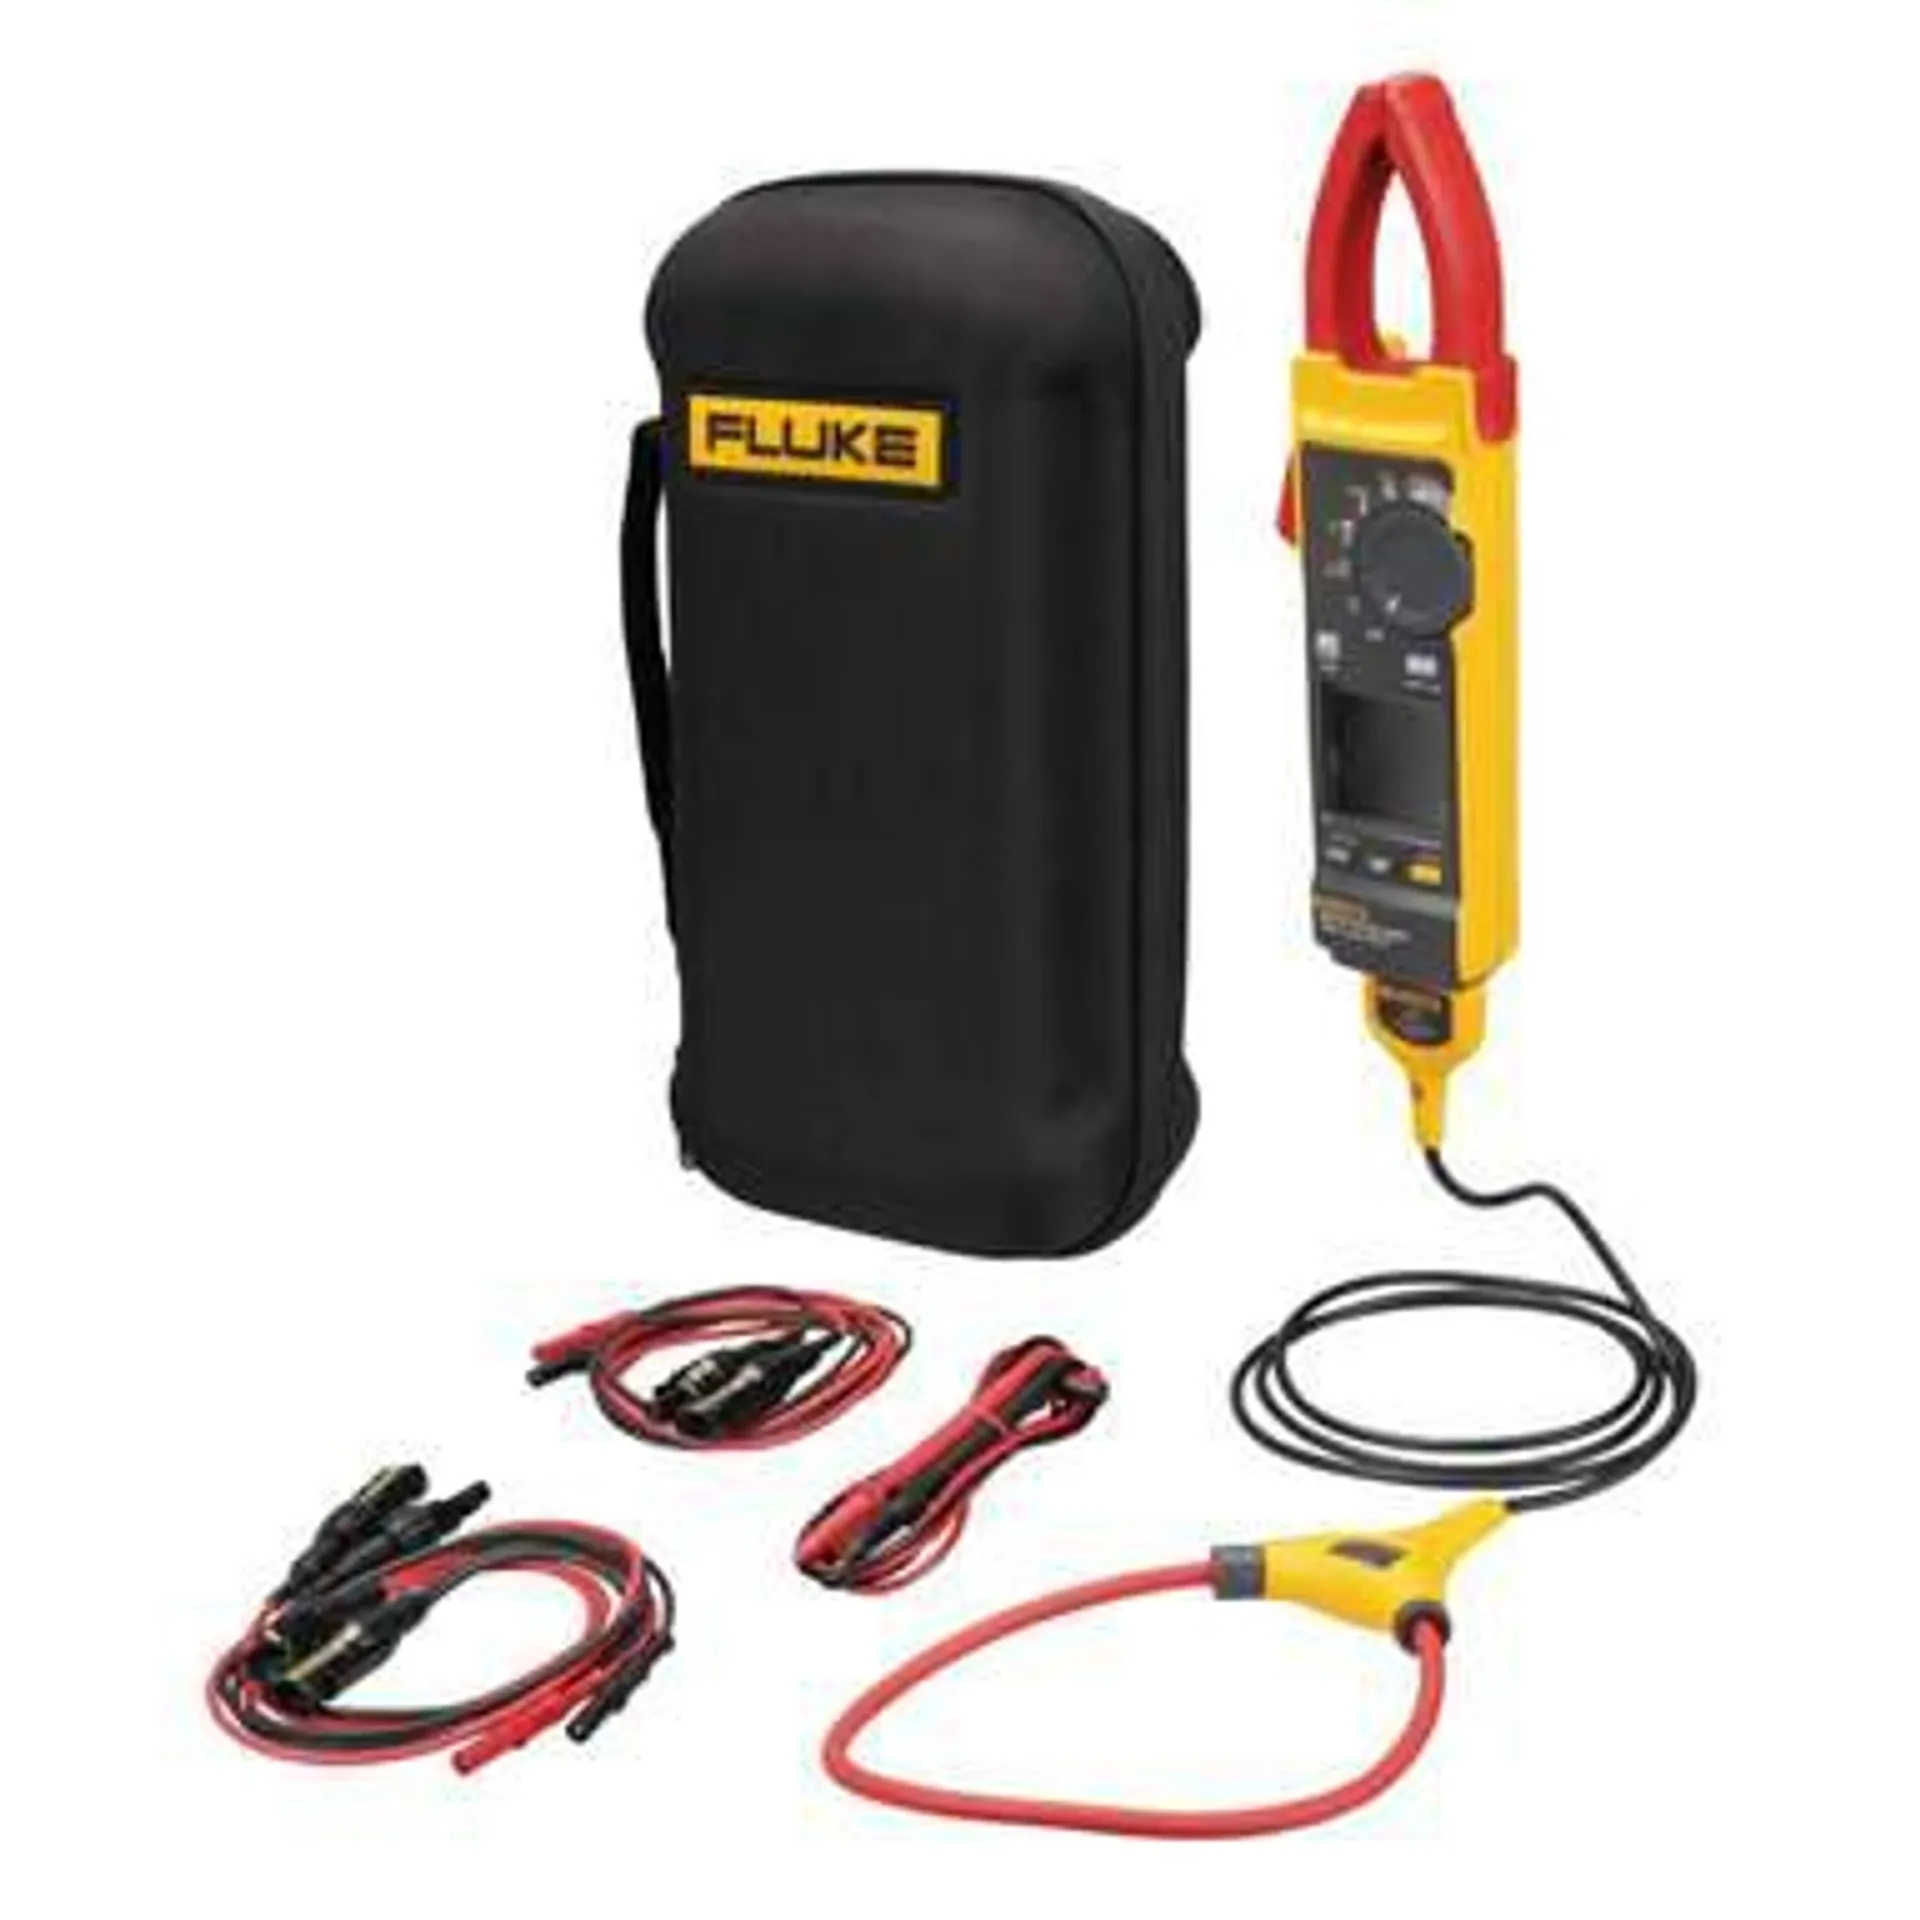 Fluke TRMS Clamp Meter with iFlex and MC4 Solar Lead Set